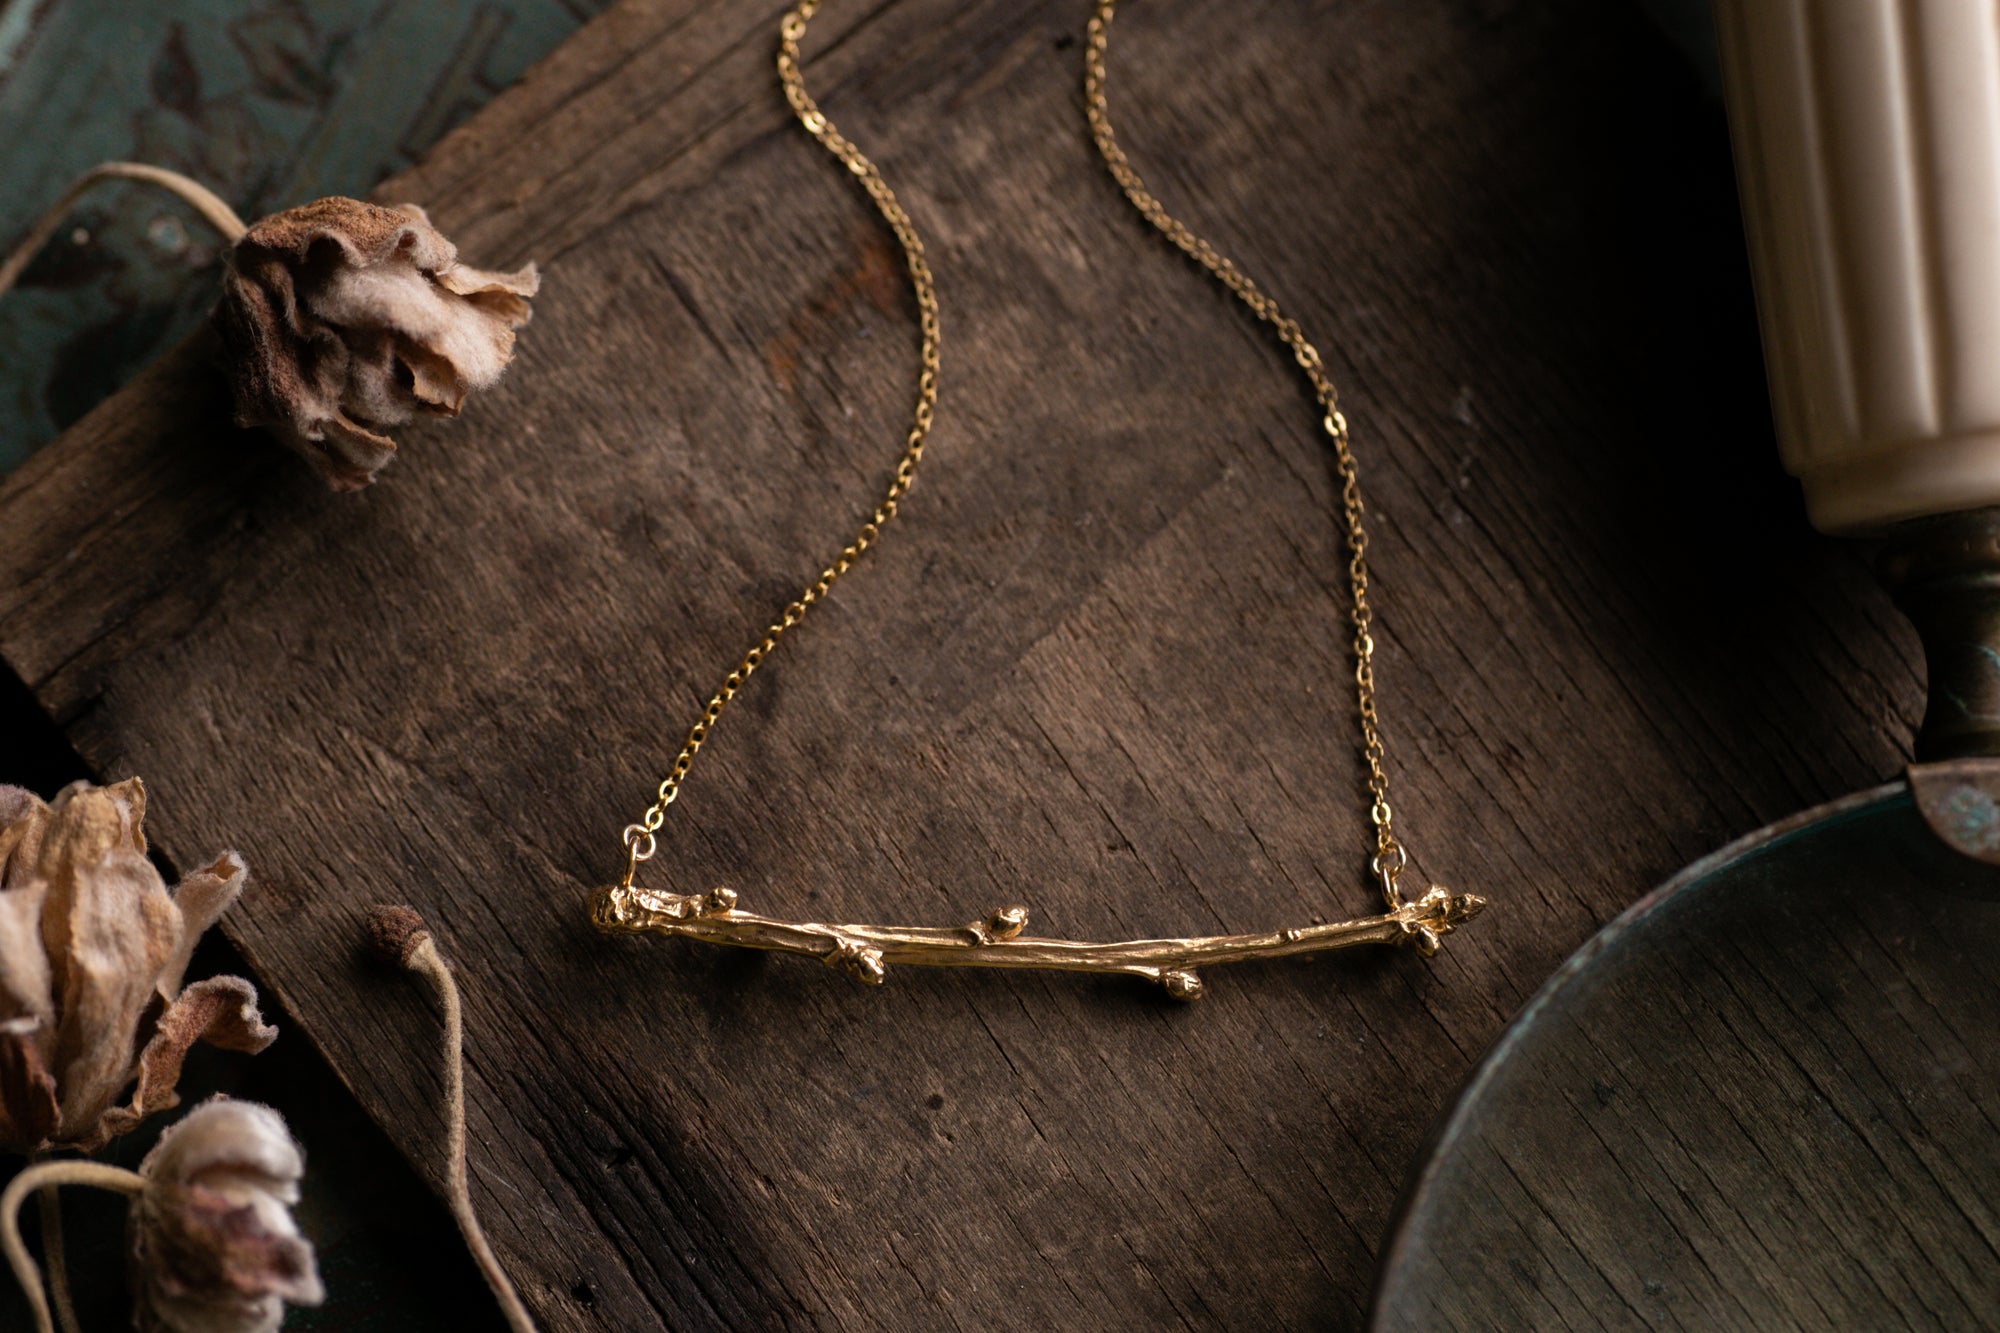 Oak branch necklace ~ For Bravery, Strength, Growth & Patience